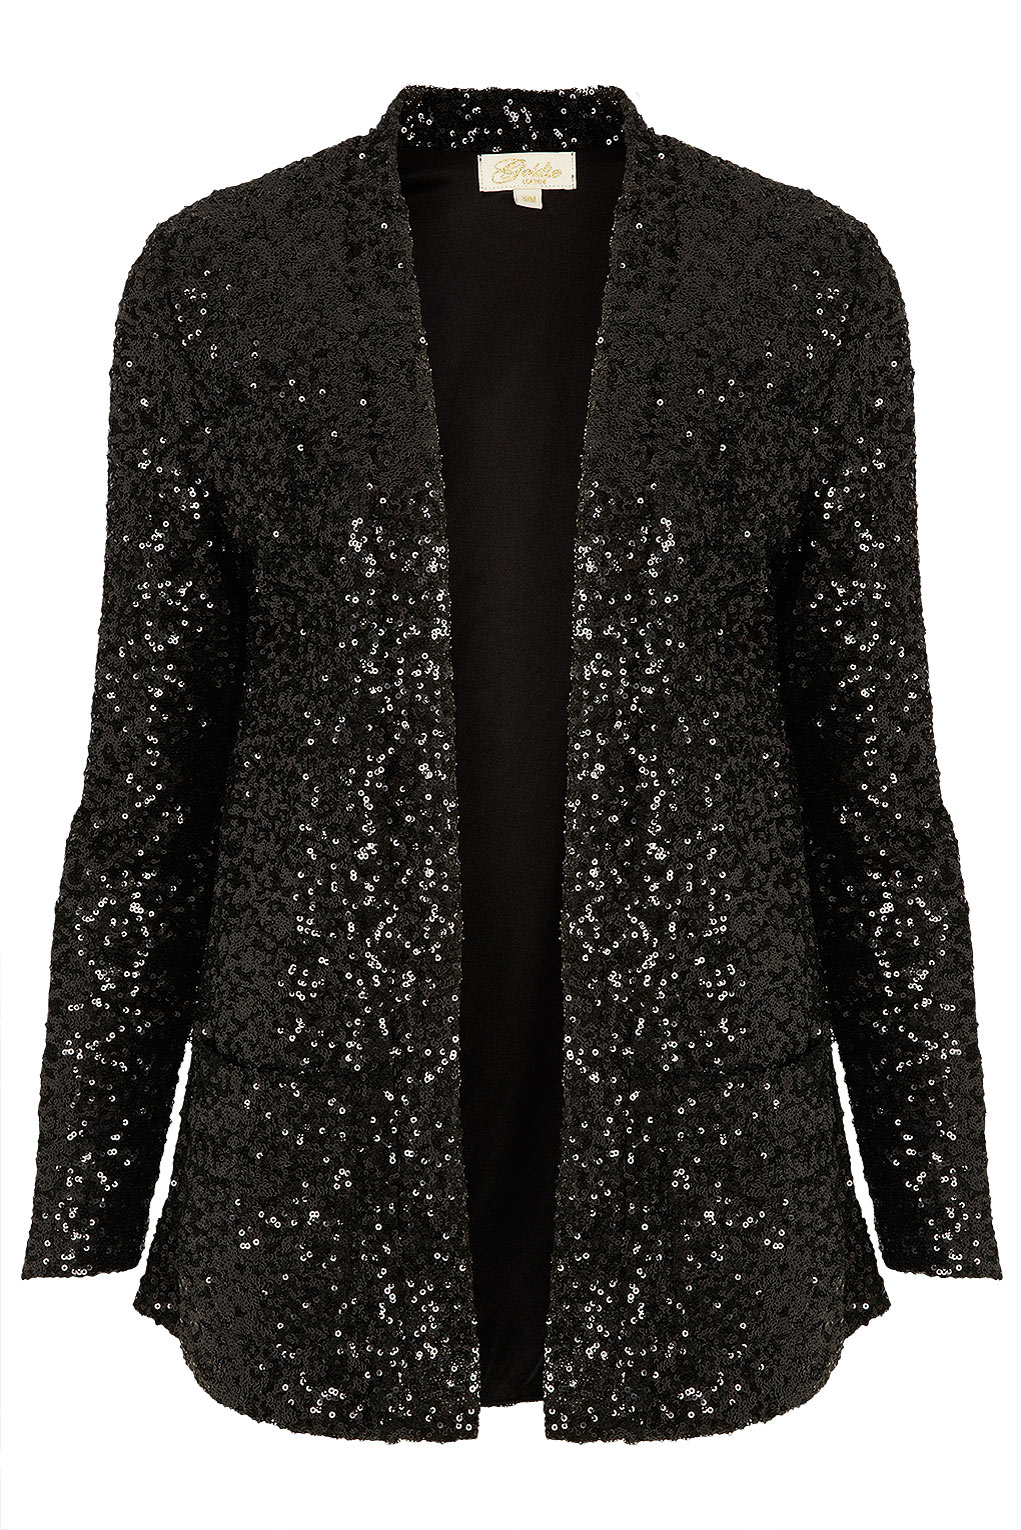 TOPSHOP Jagger Sequin Jacket By Goldie in Black - Lyst